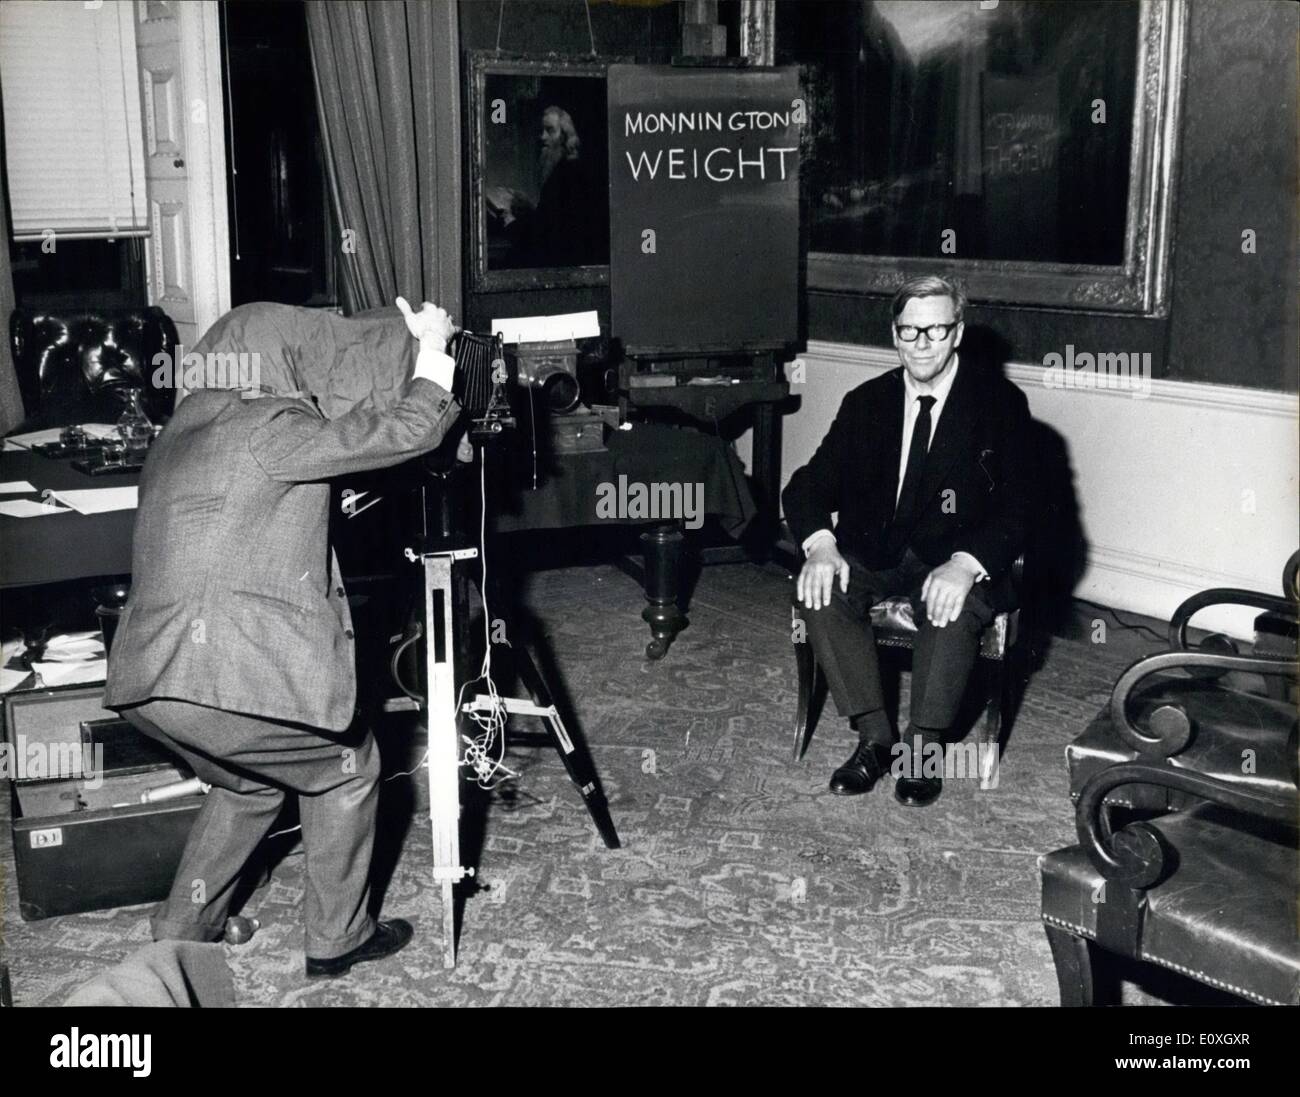 Dec. 12, 1966 - New President of the Royal Academy: Photo shows Mr. Walter Thomas Monnington, 63, sits down to have his photograph taken in a panelled room at Burlington House, after being elected as President of the Royal Academy is succession to Sir Charles Wheeler. Mr. Monnington is a senior teacher at Slade School of Fine Art University College, London. Stock Photo